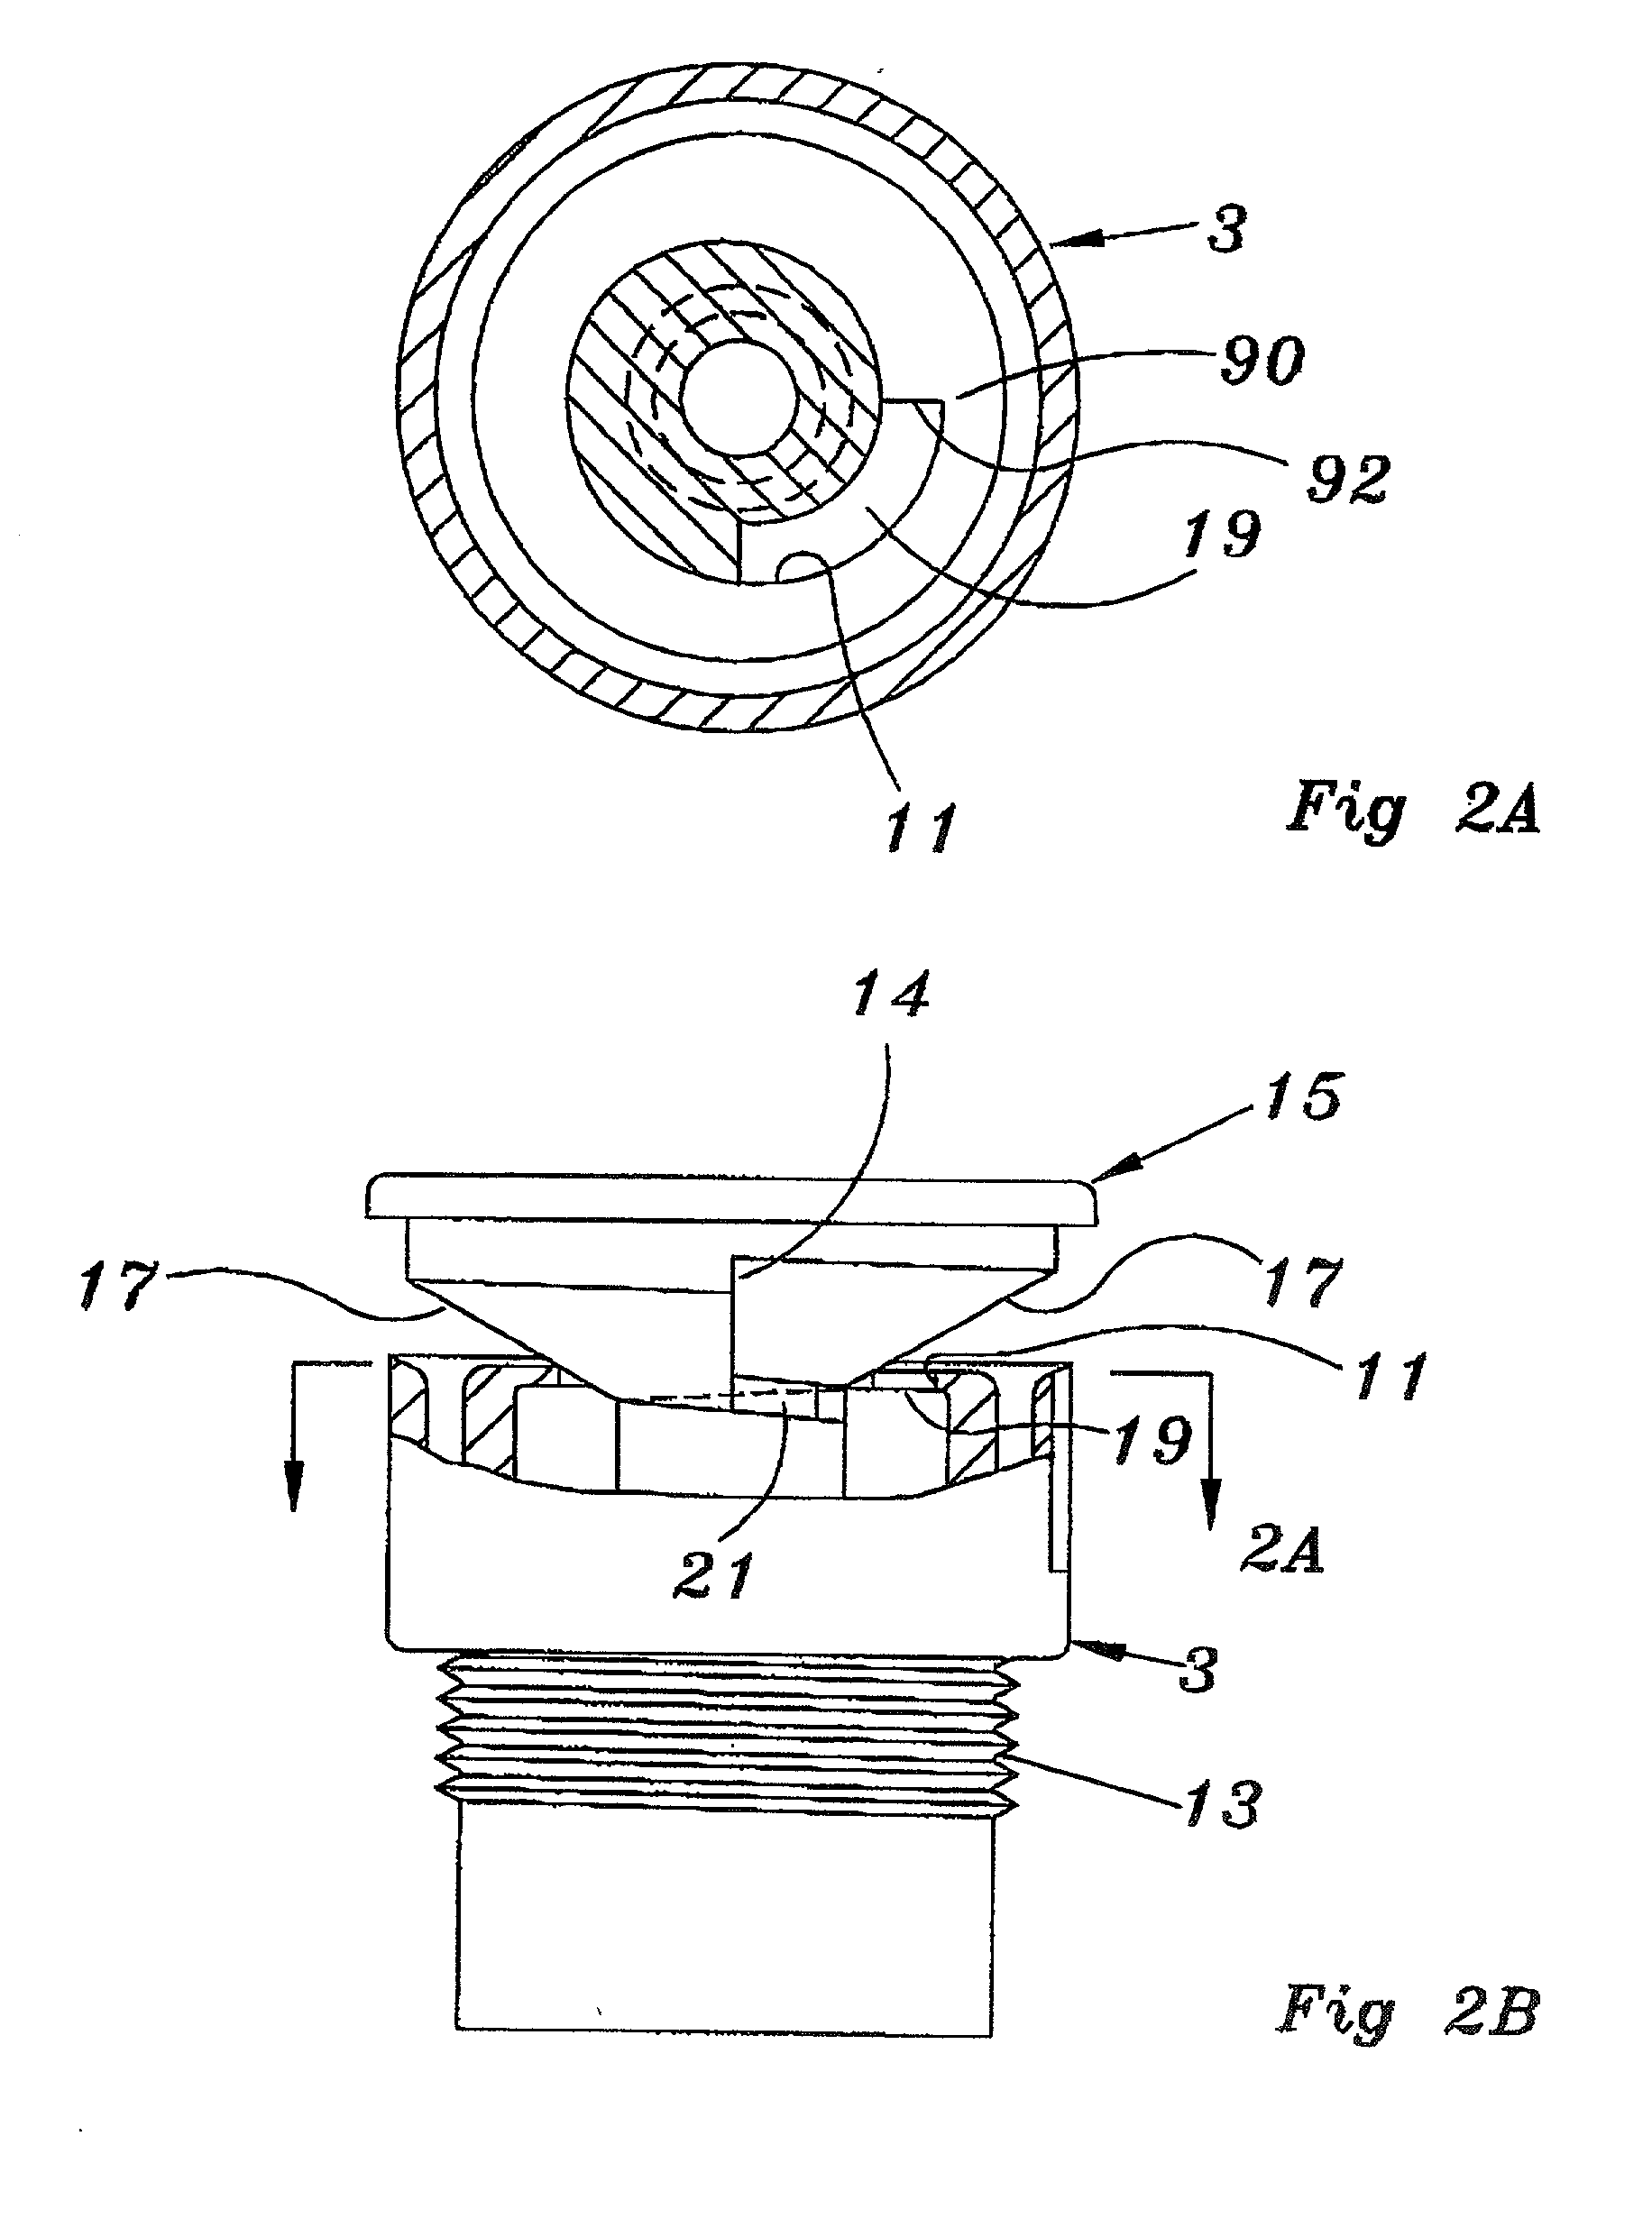 Spray nozzle with adjustable arc spray elevation angle and flow